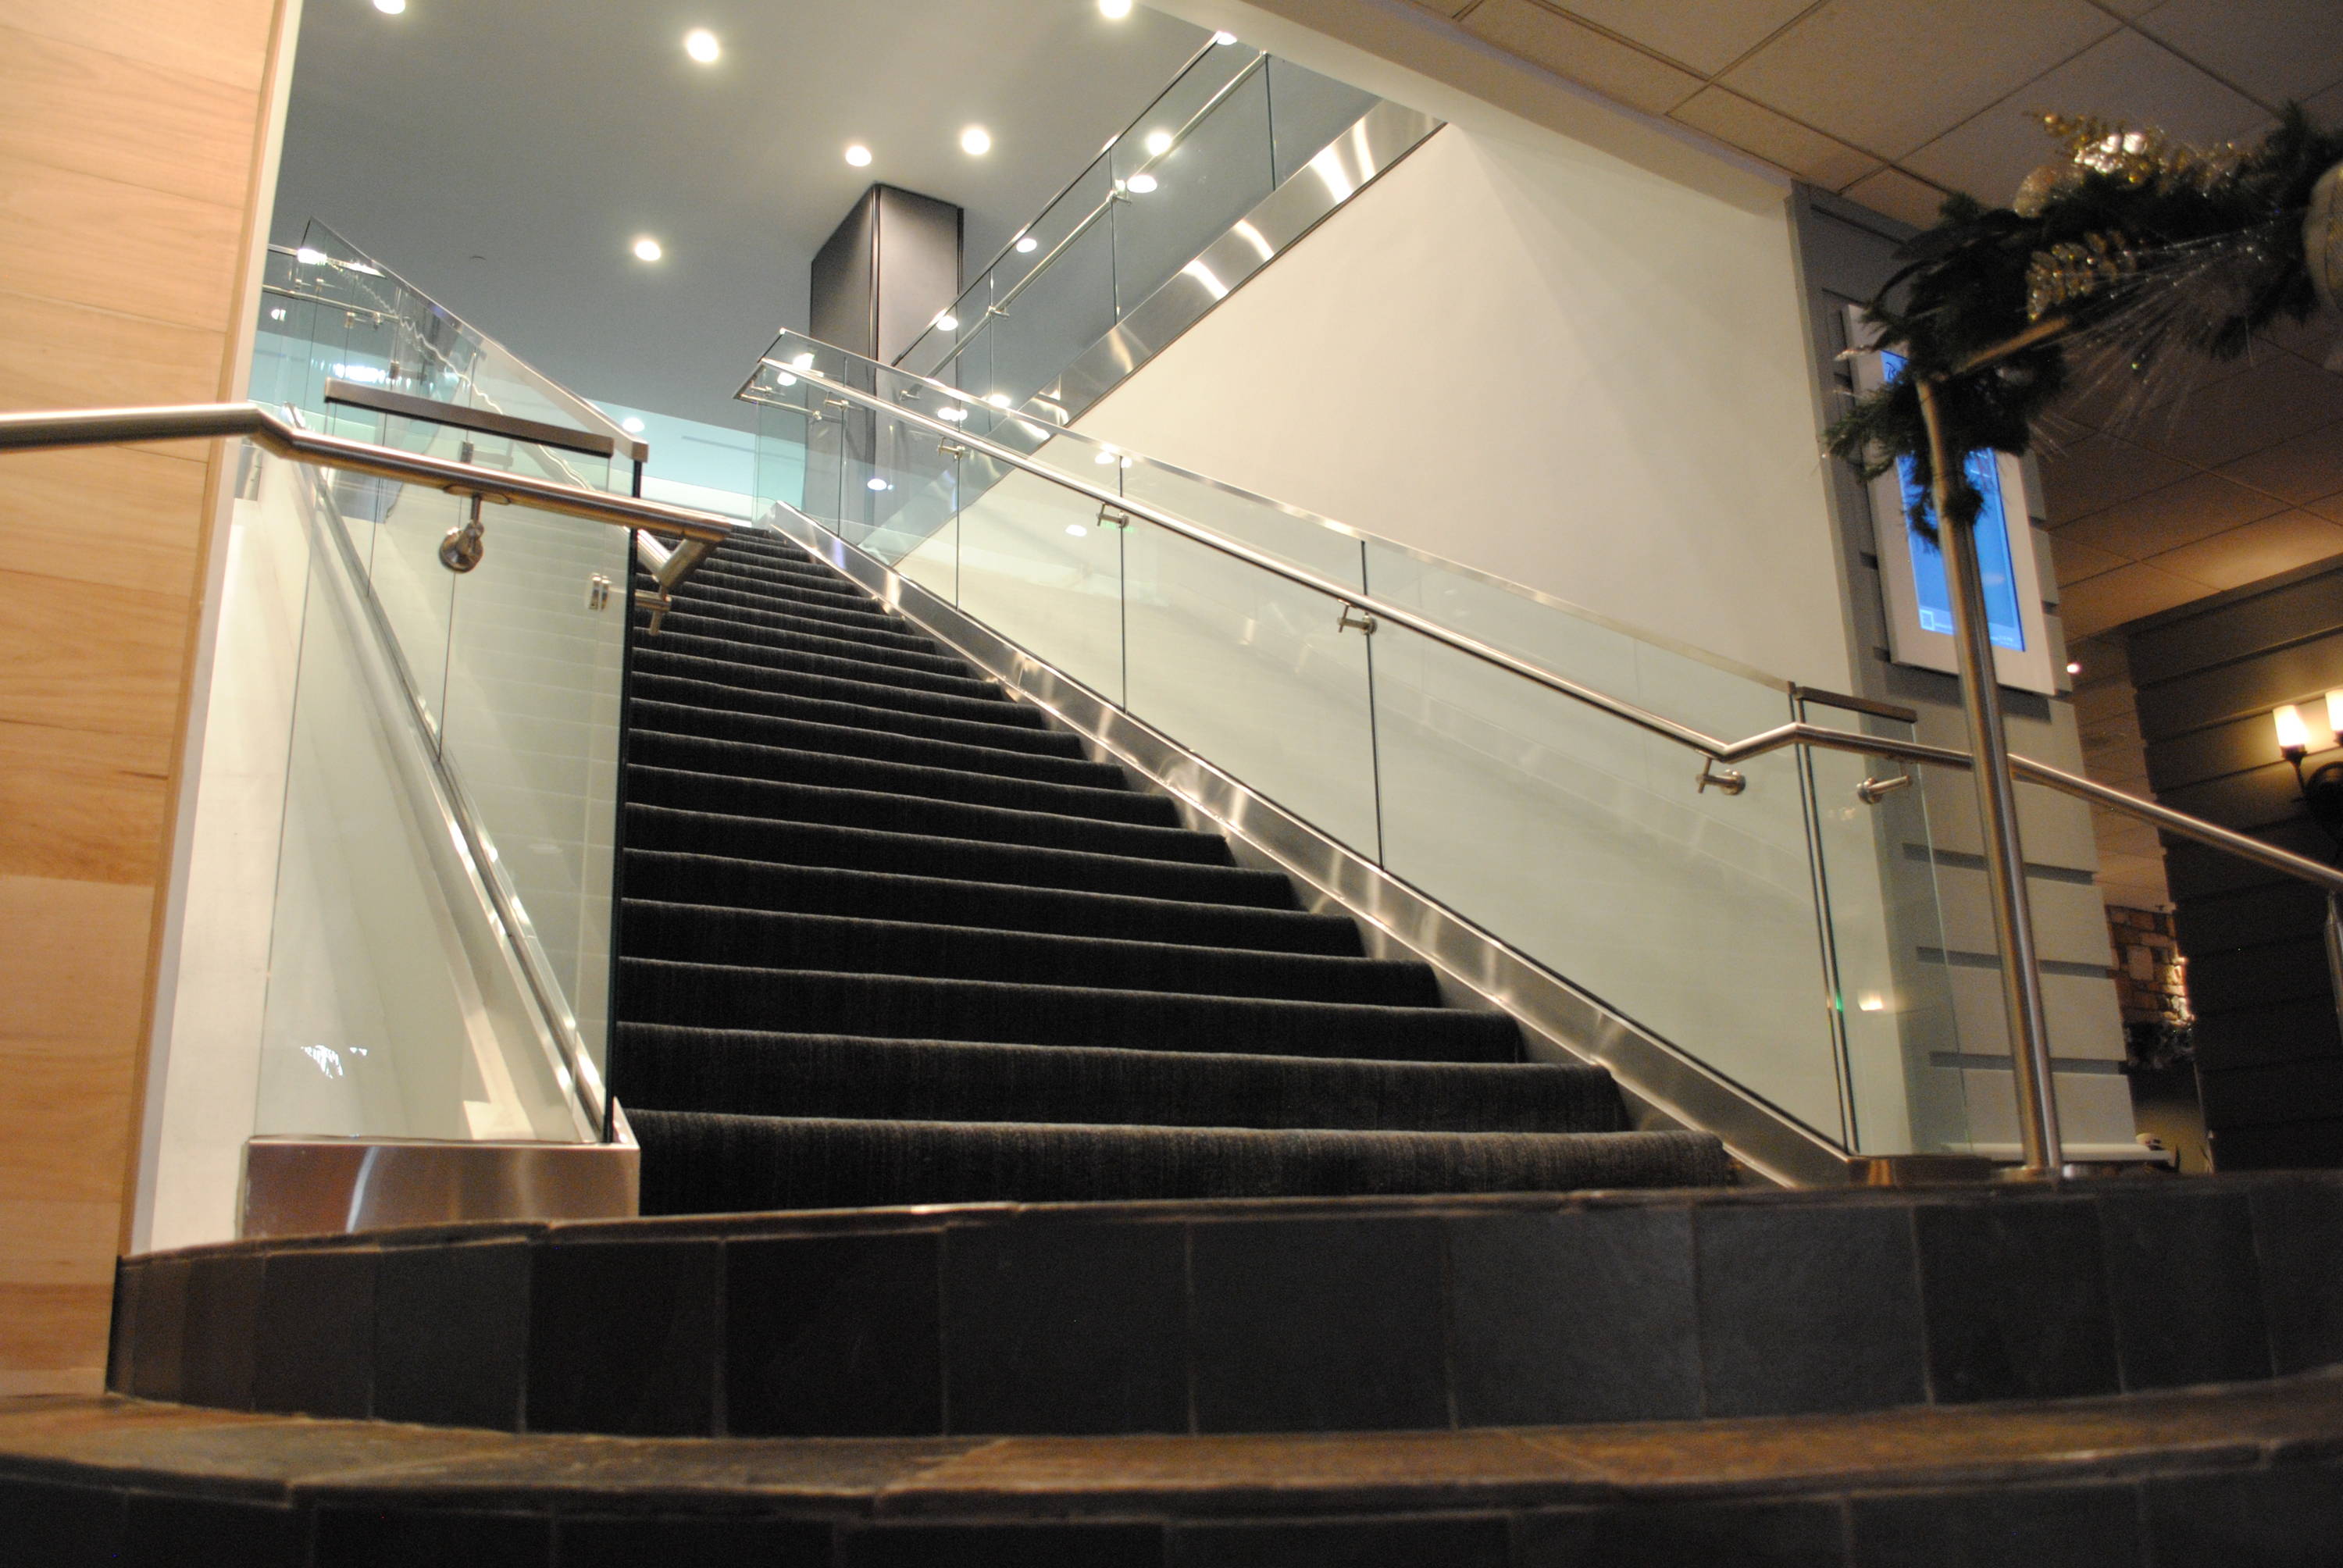 Glass handrails and stairwells